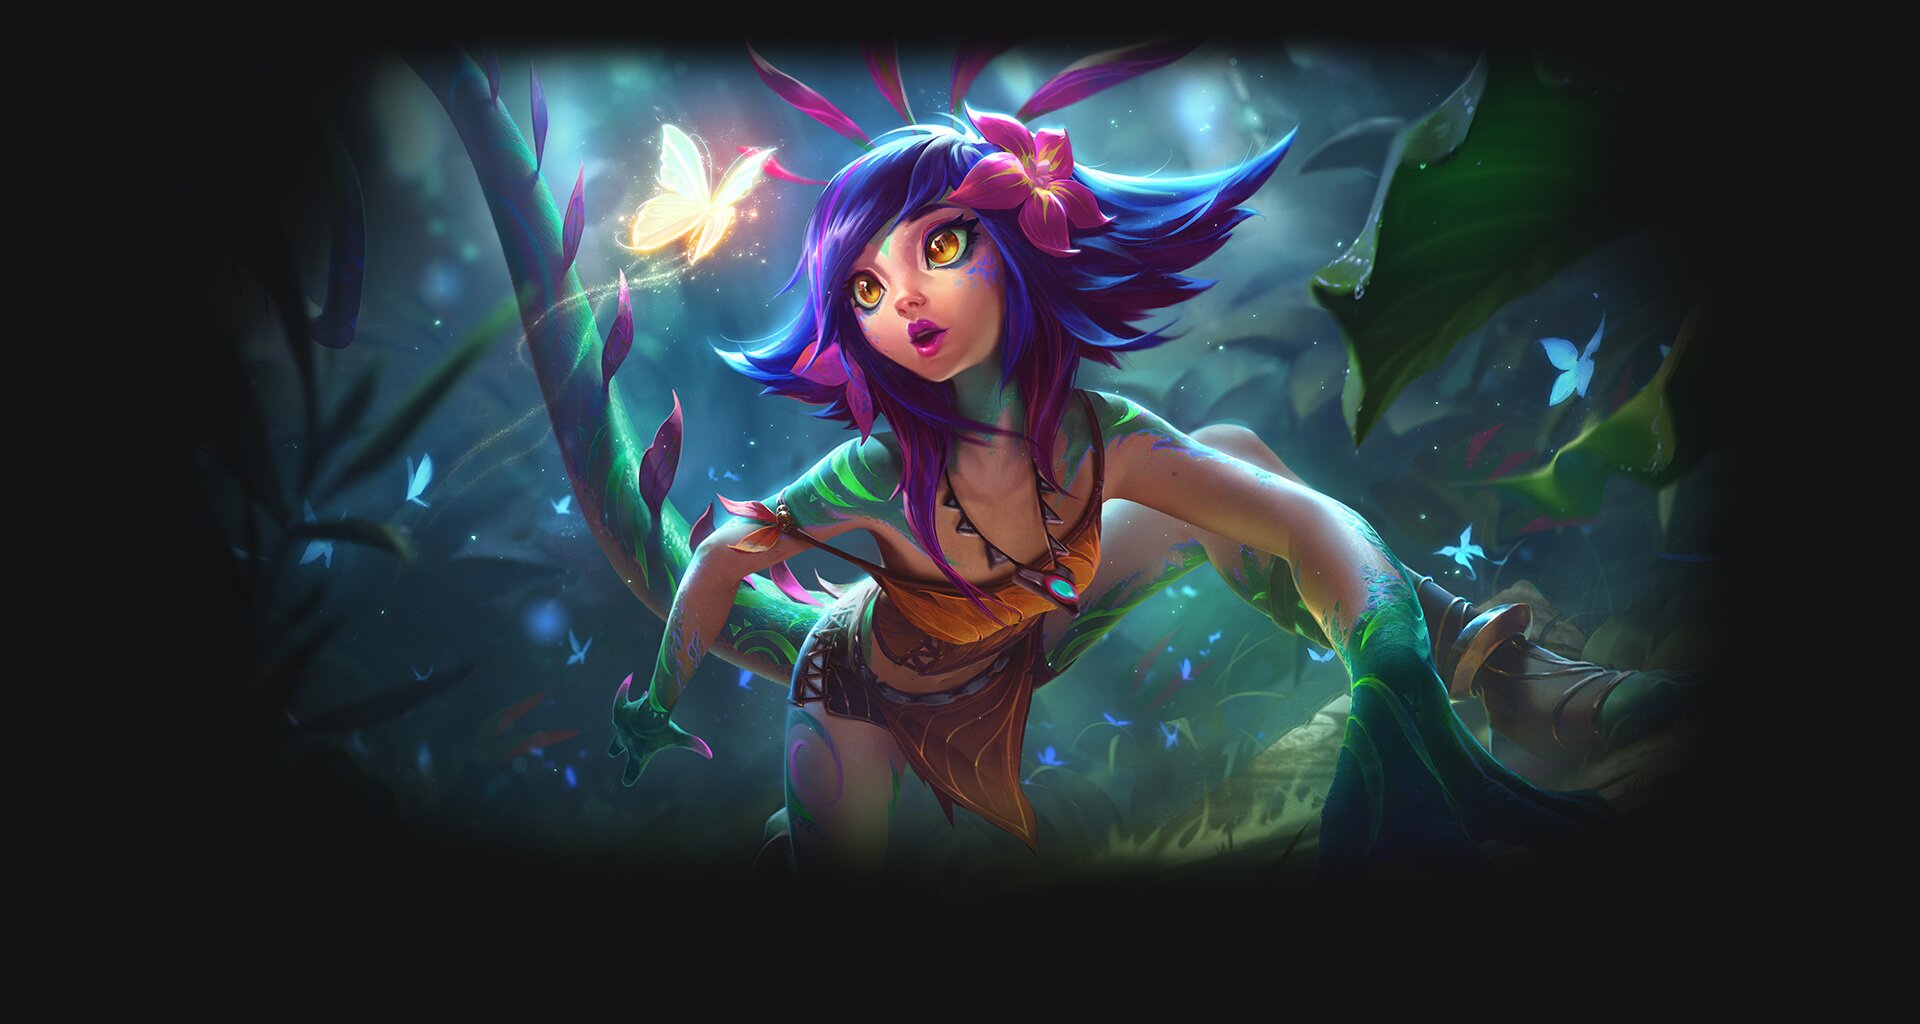 As her name implies, Neeko has a kit that revolves around disguising herself and confusing enemies.